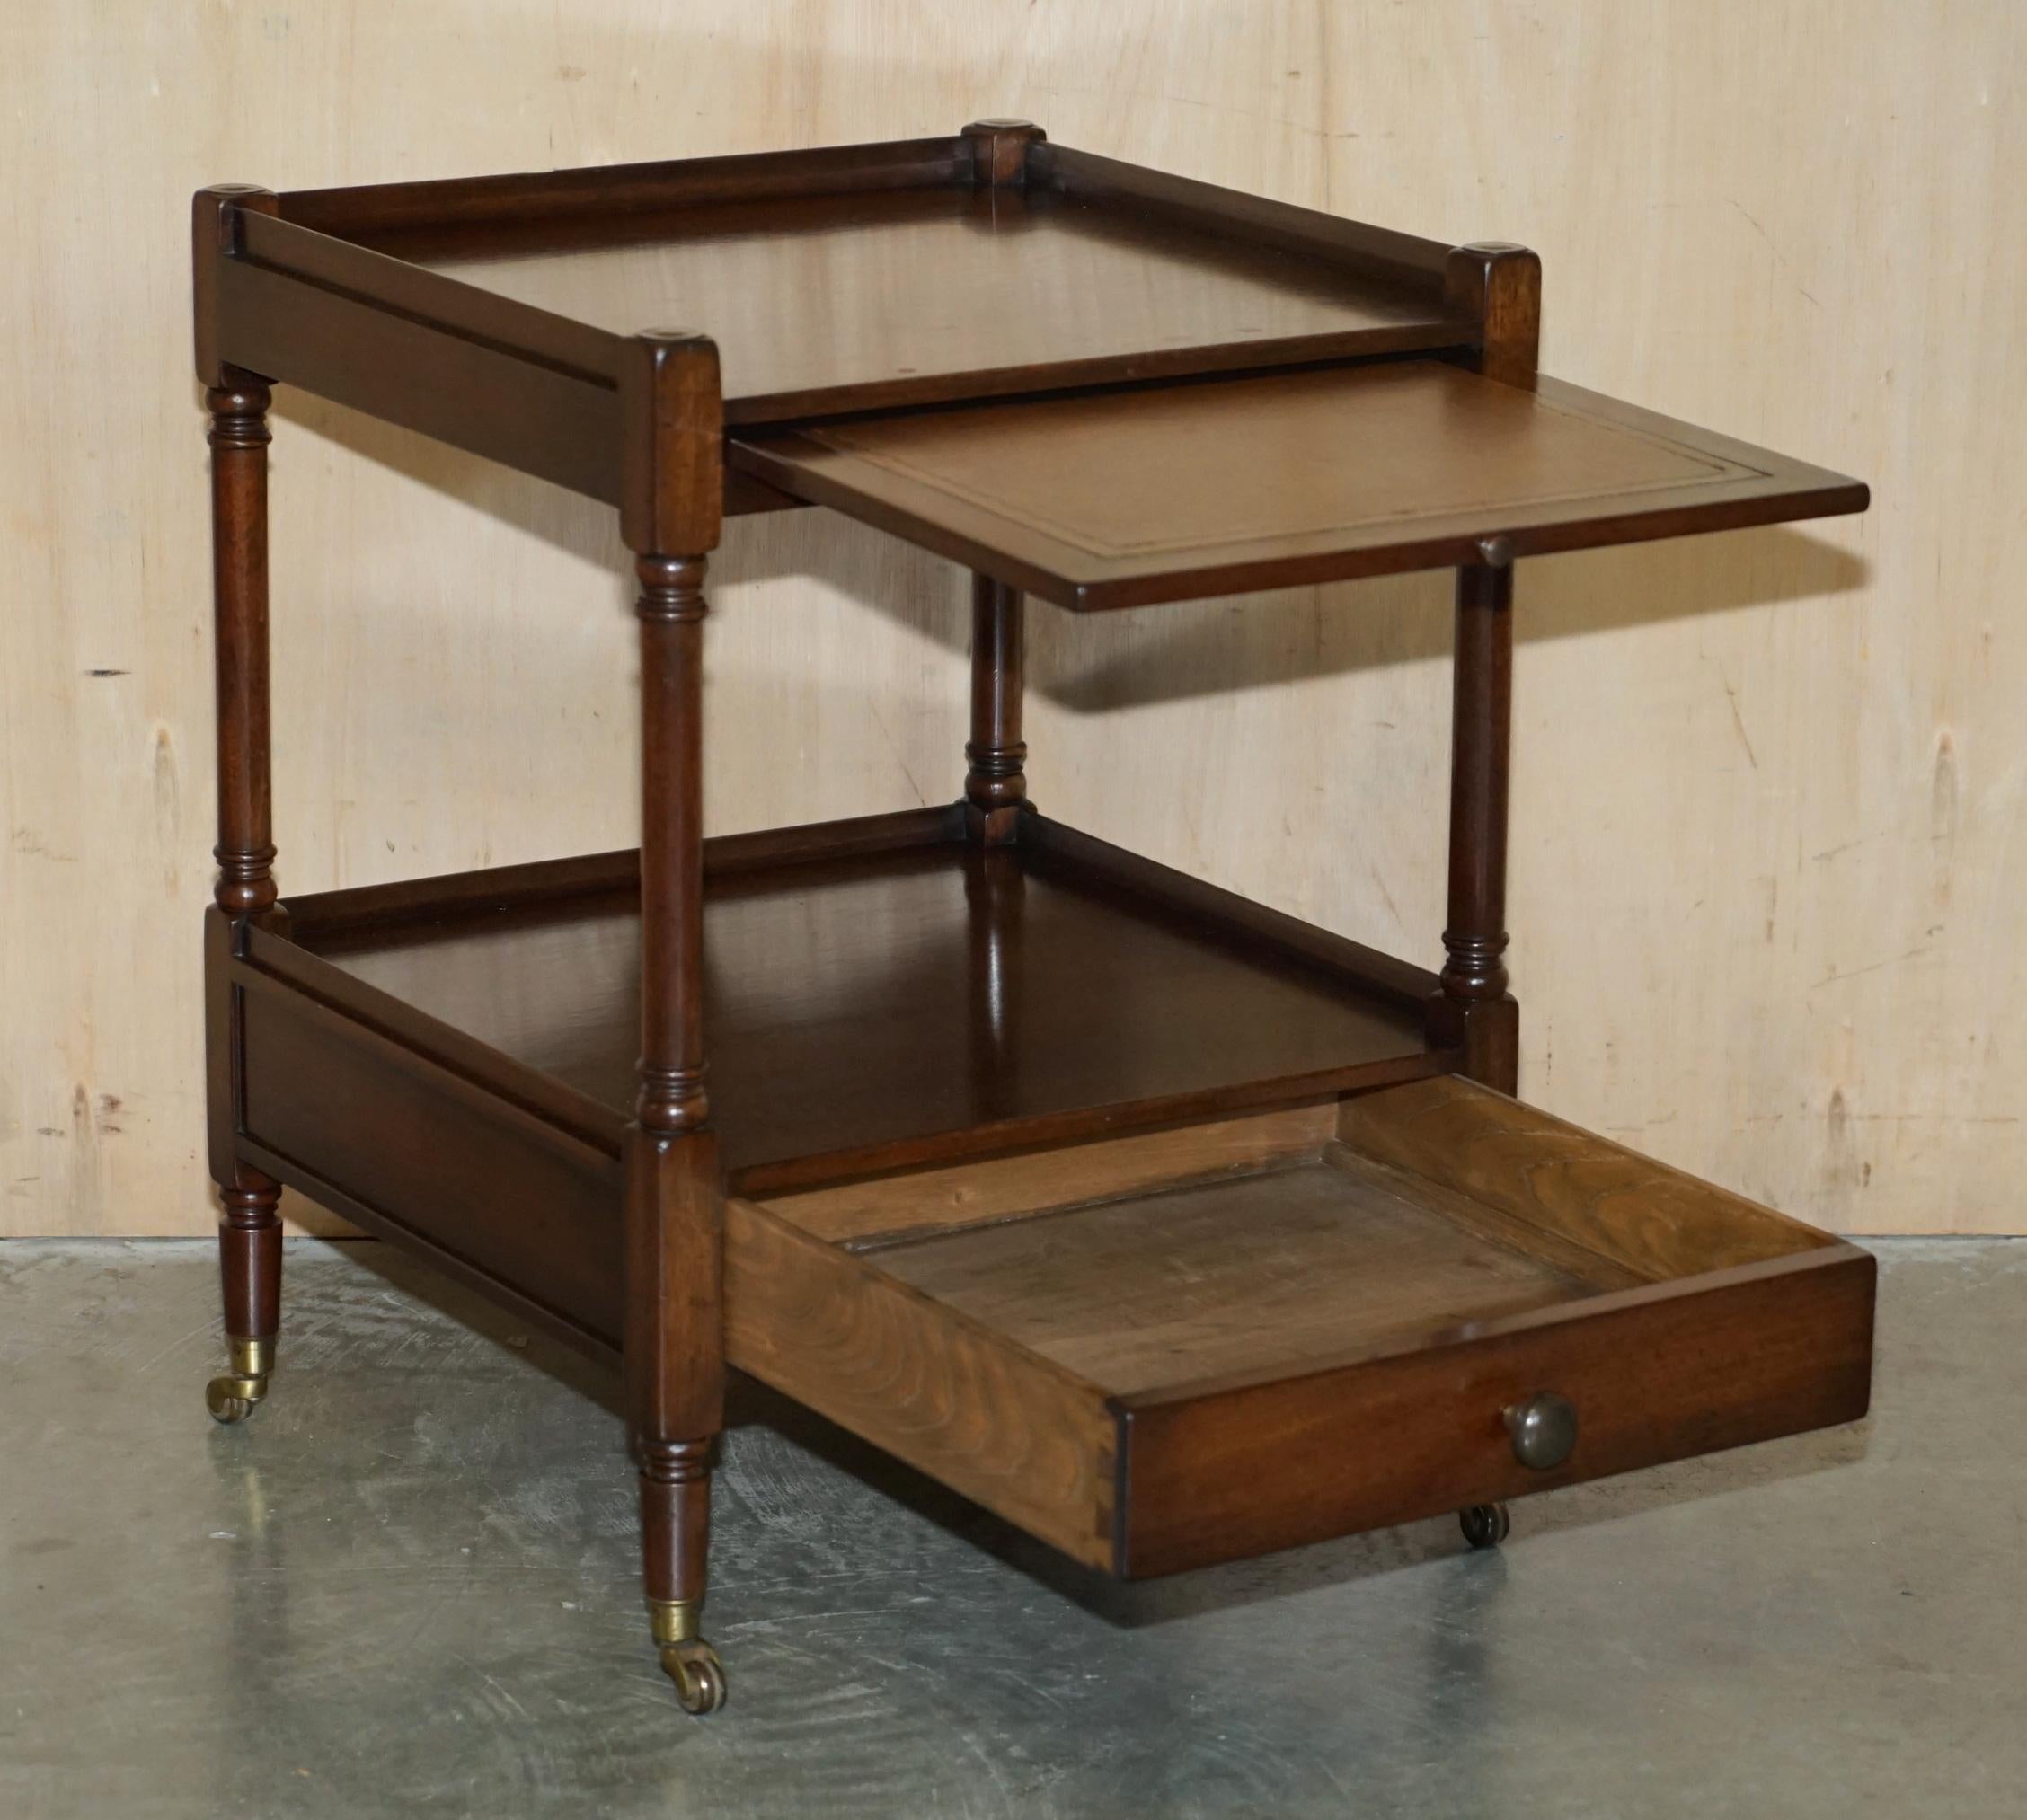 PAIR OF STUNNiNG TWO TIERED SIDE TABLES WITH BROWN LEATHER BUTLERS SERVING TRAYS 11